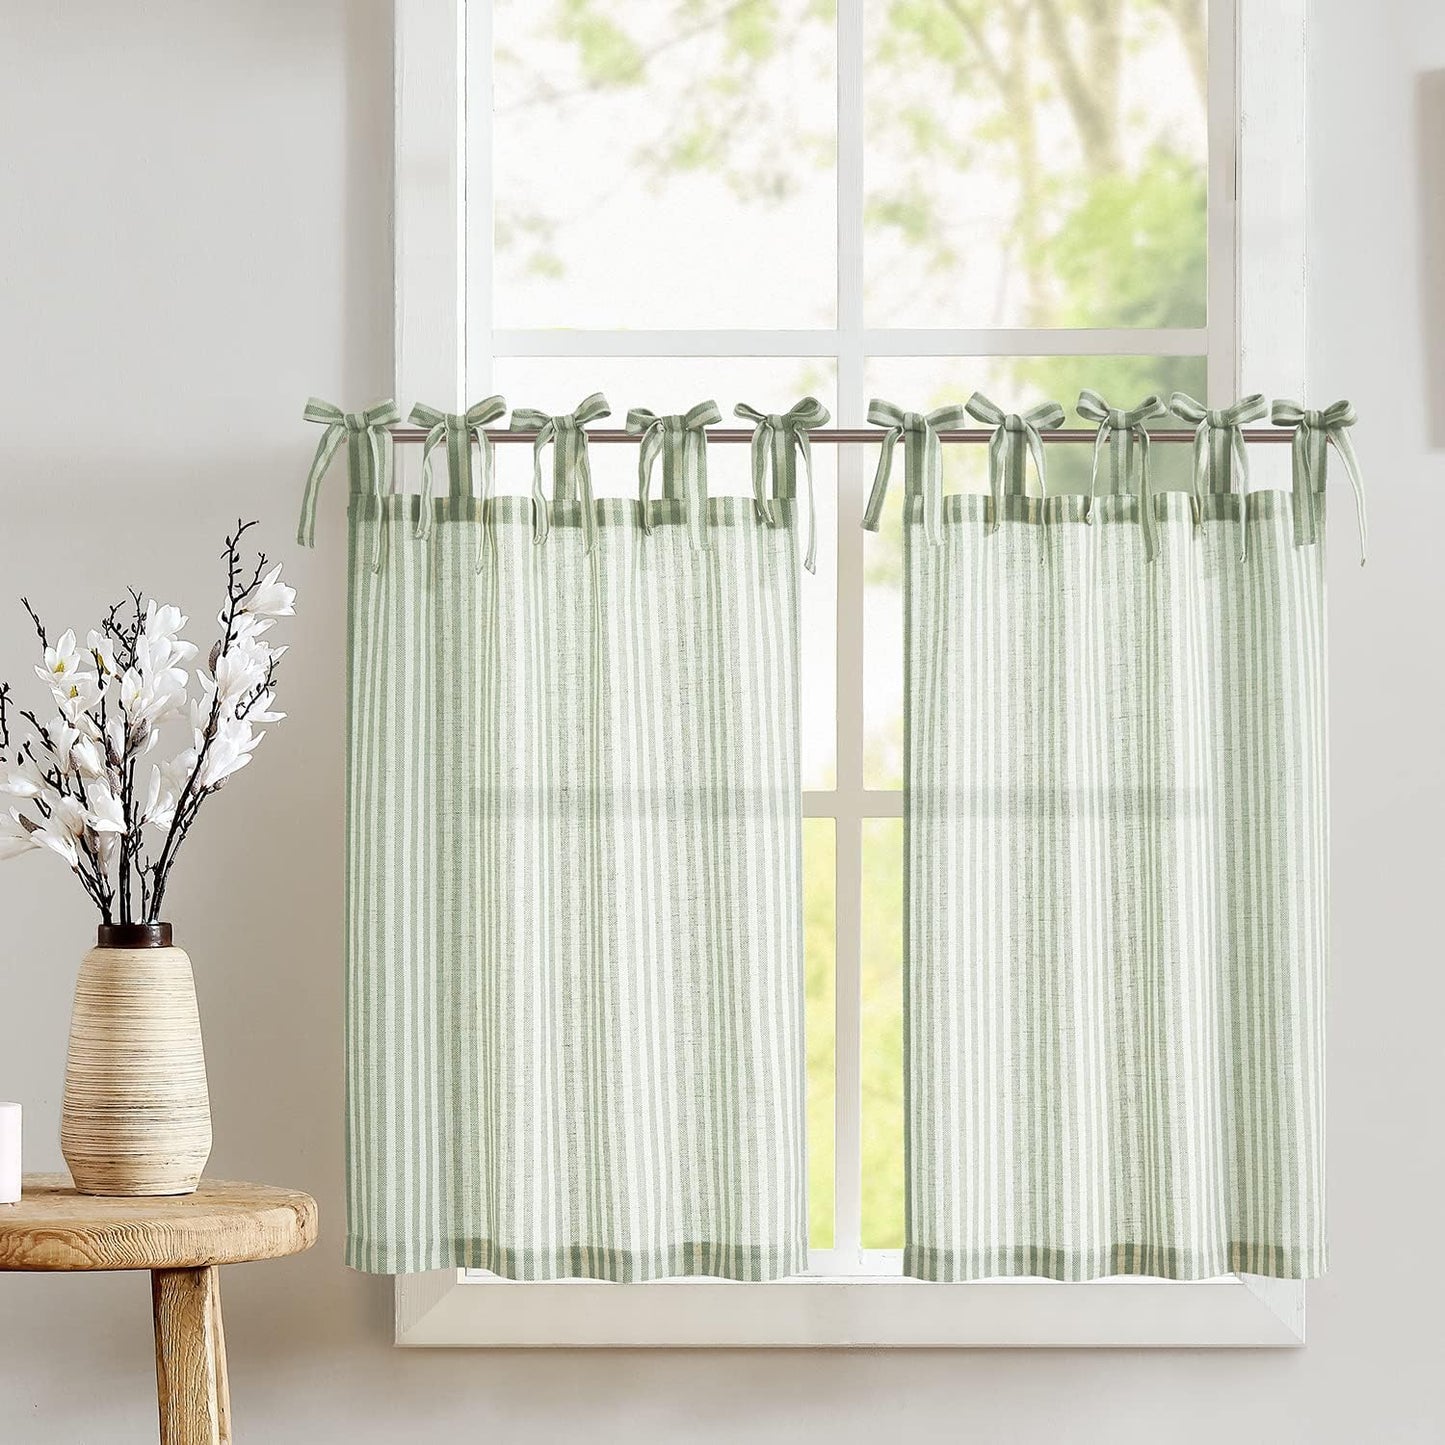 Jinchan Kitchen Curtains Striped Tier Curtains Ticking Stripe Linen Curtains Pinstripe Cafe Curtains 24 Inch Length for Living Room Bathroom Farmhouse Curtains Rod Pocket 2 Panels Black on Beige  CKNY HOME FASHION Tie Top Striped Sage Green W26 X L36 